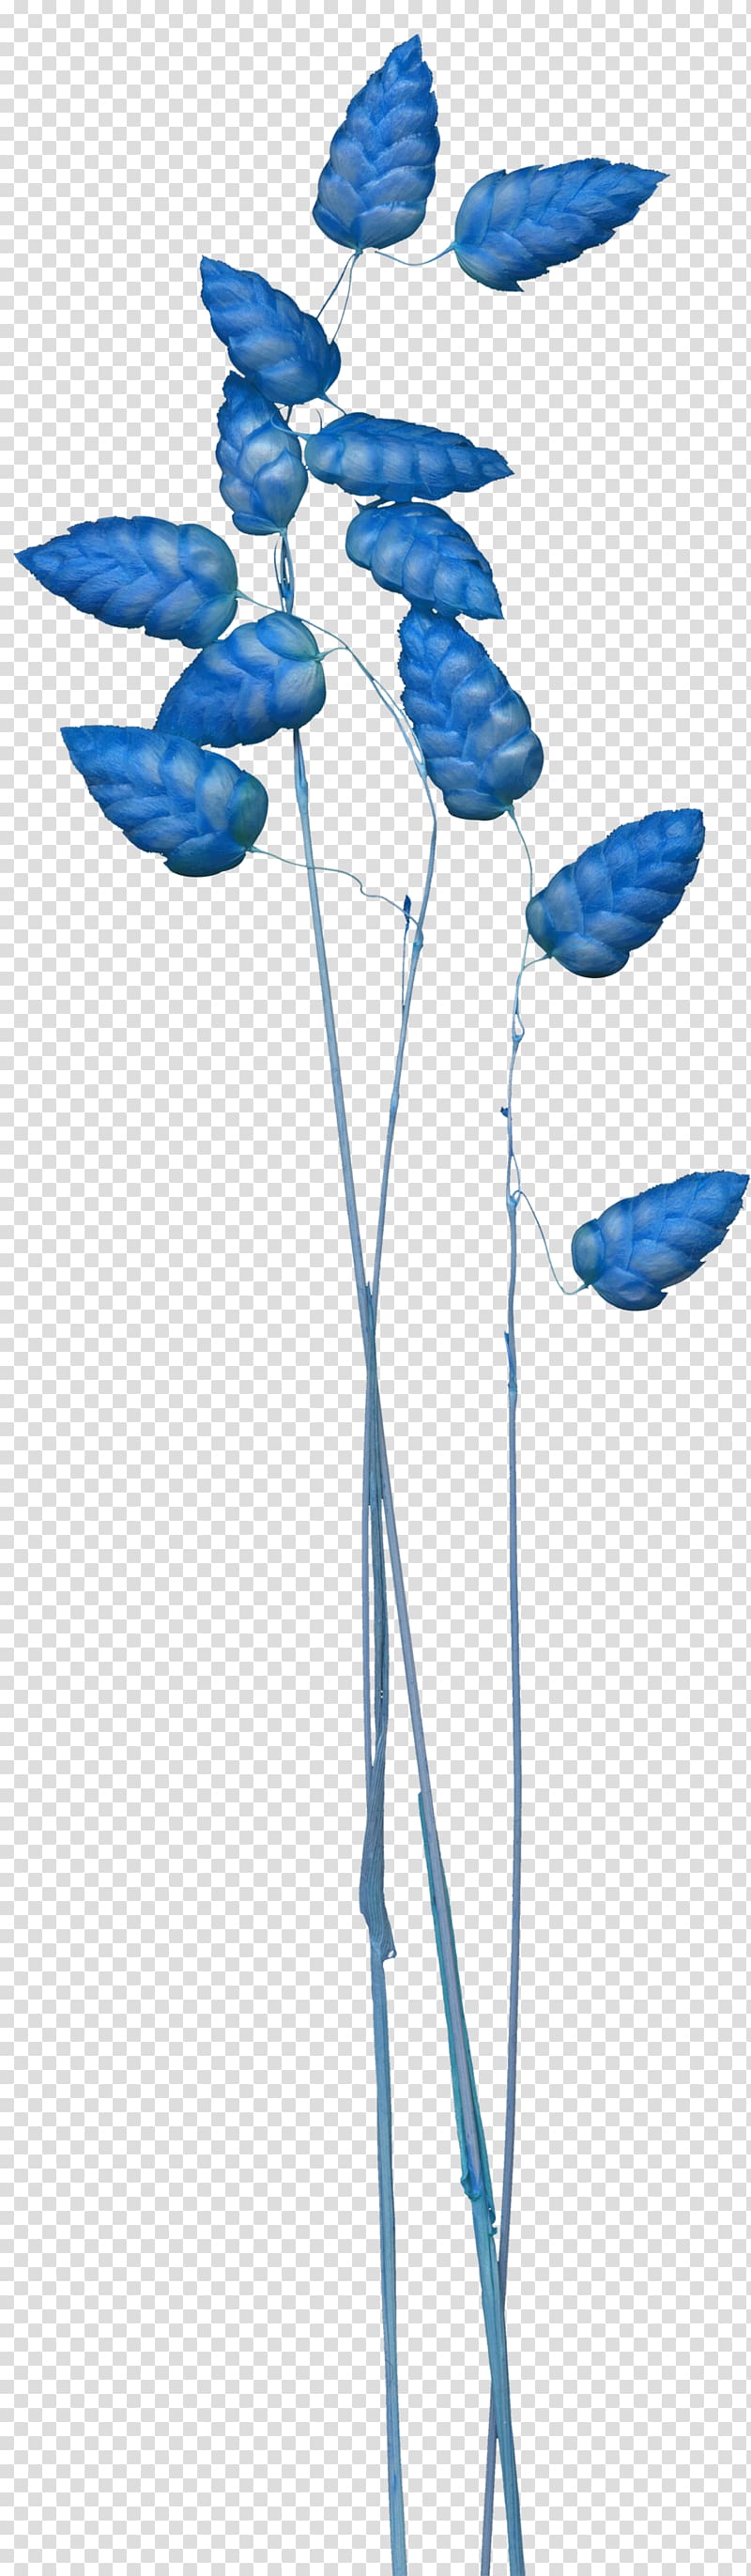 Blue Balloon , Blue leaves small balloon transparent background PNG clipart